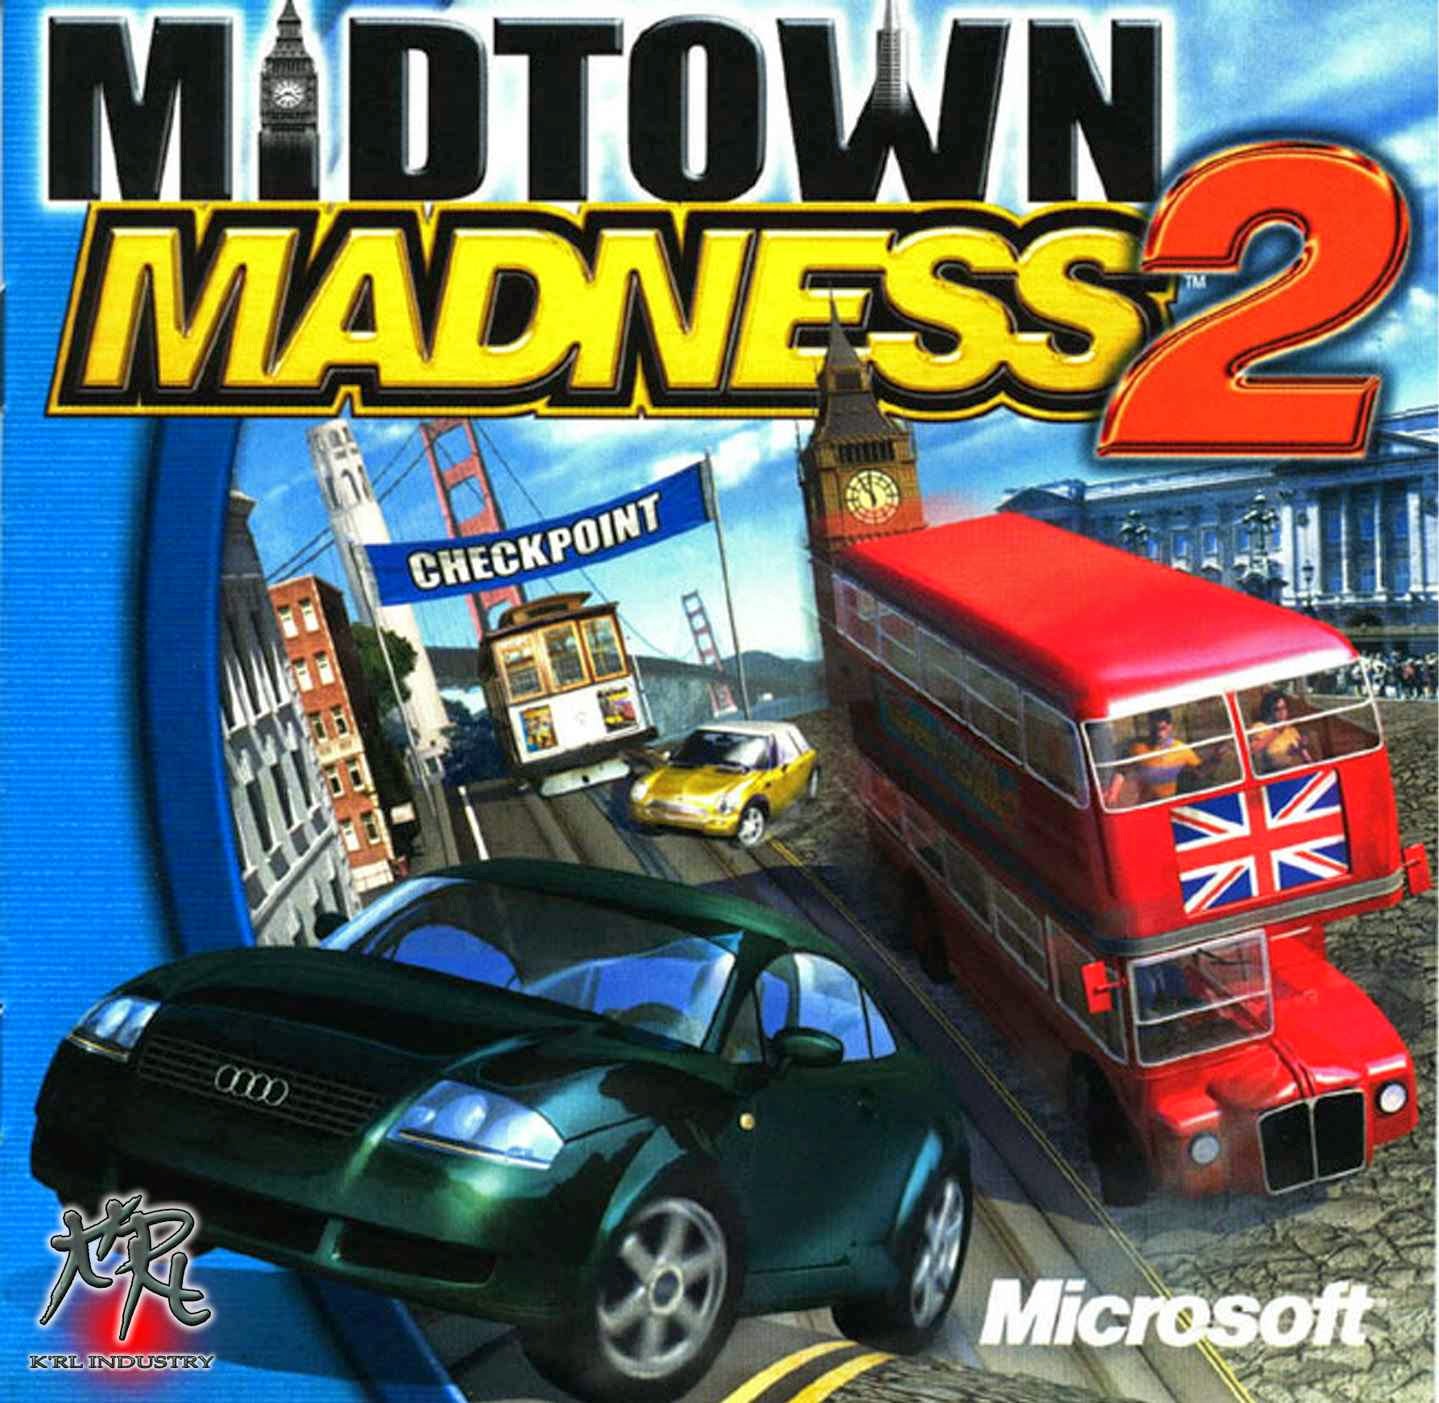 Midtown Madness 2 Free Game Download